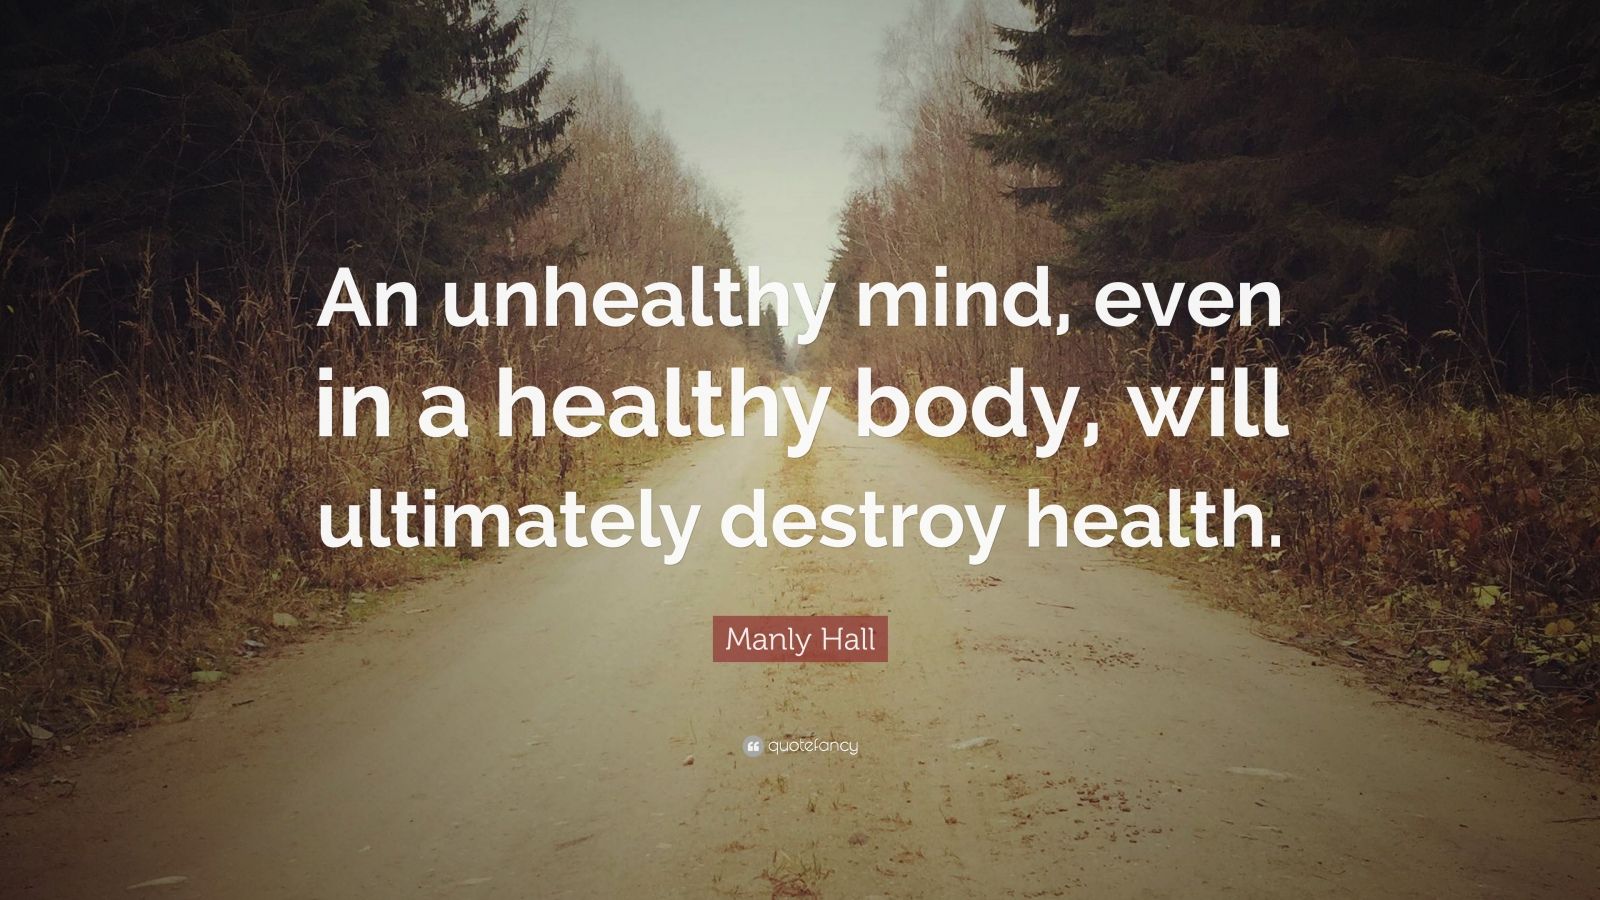 Manly Hall Quote: “An unhealthy mind, even in a healthy body, will